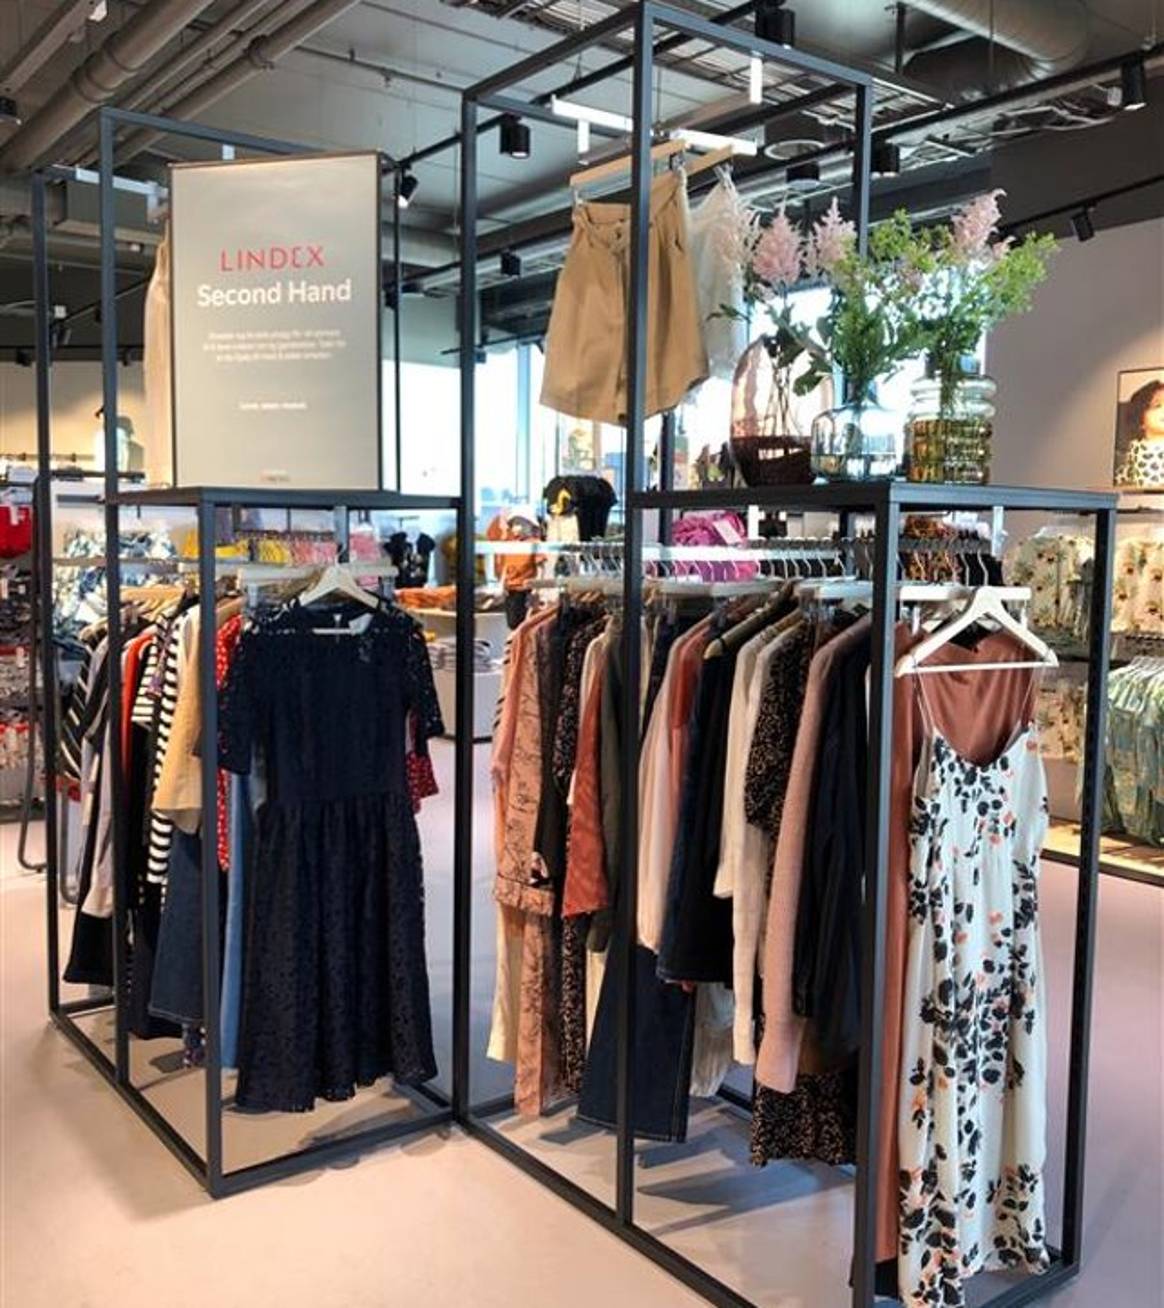 Babywear and womenswear resold at a Lindex store in
Norway. Photo courtesy of Lindex.